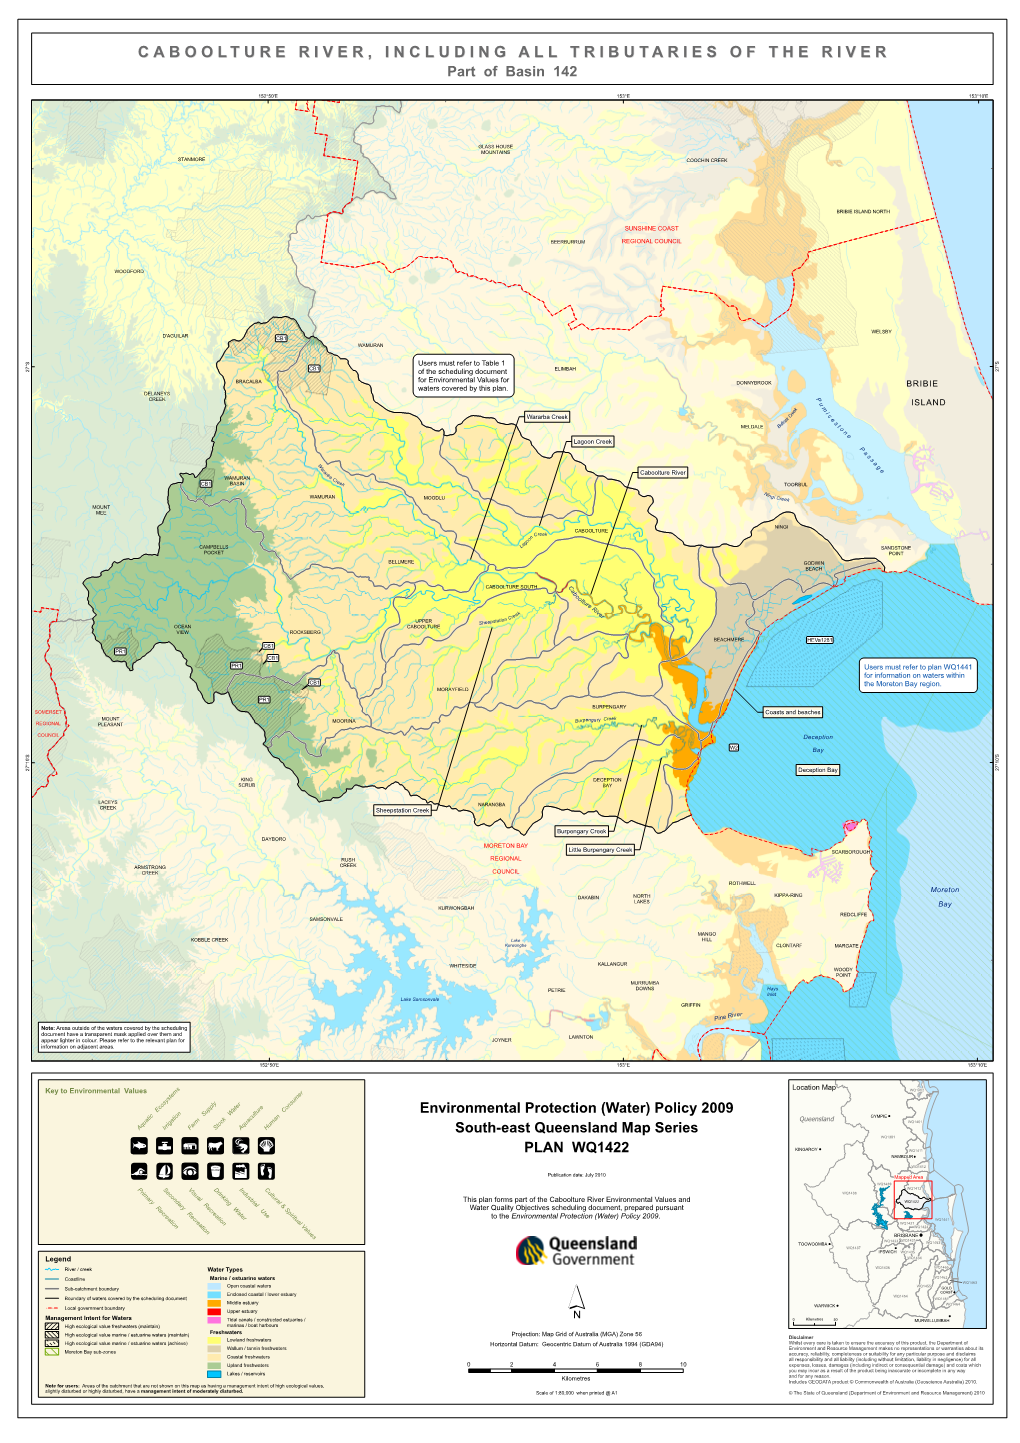 Caboolture River Environmental Values and Water Quality Objectives (Plan)